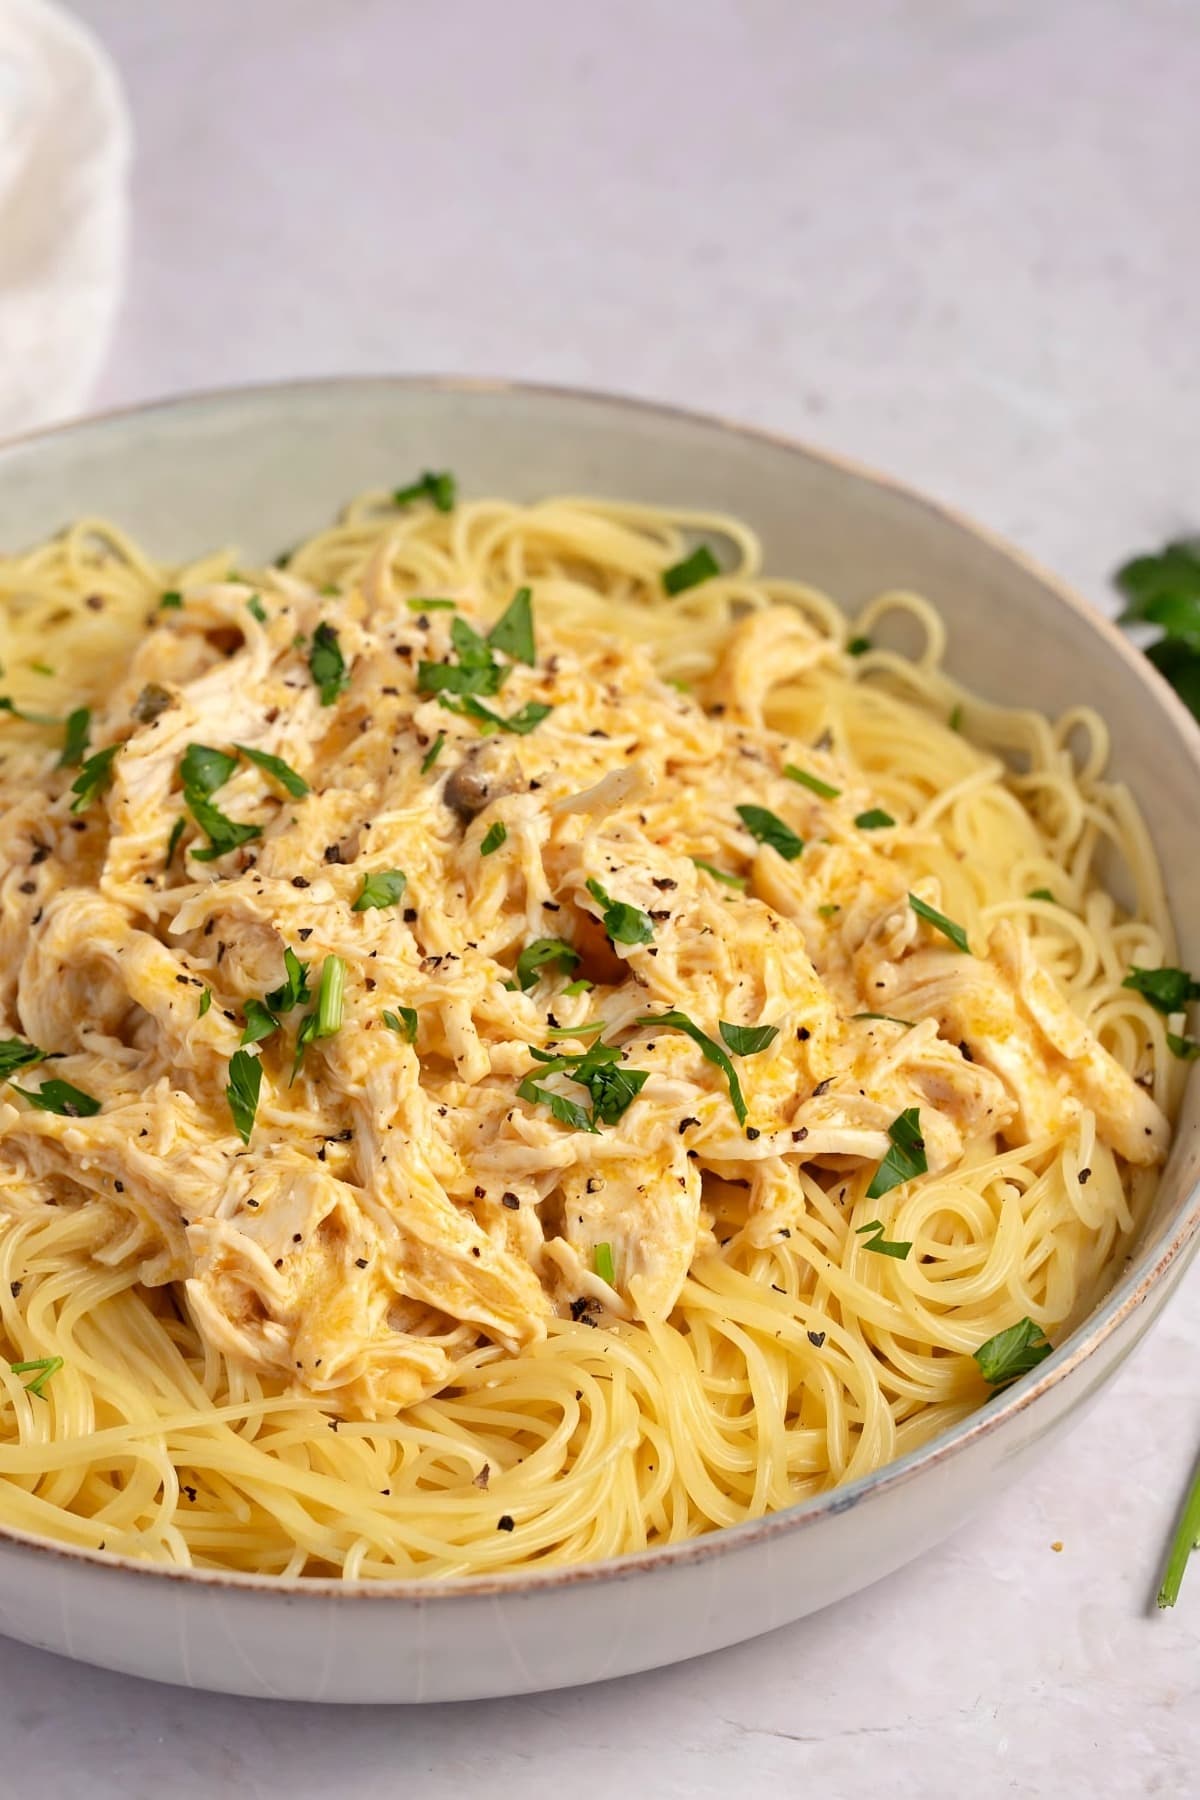 Homemade Crockpot Angel Chicken with Pasta and Herbs in a Bowl